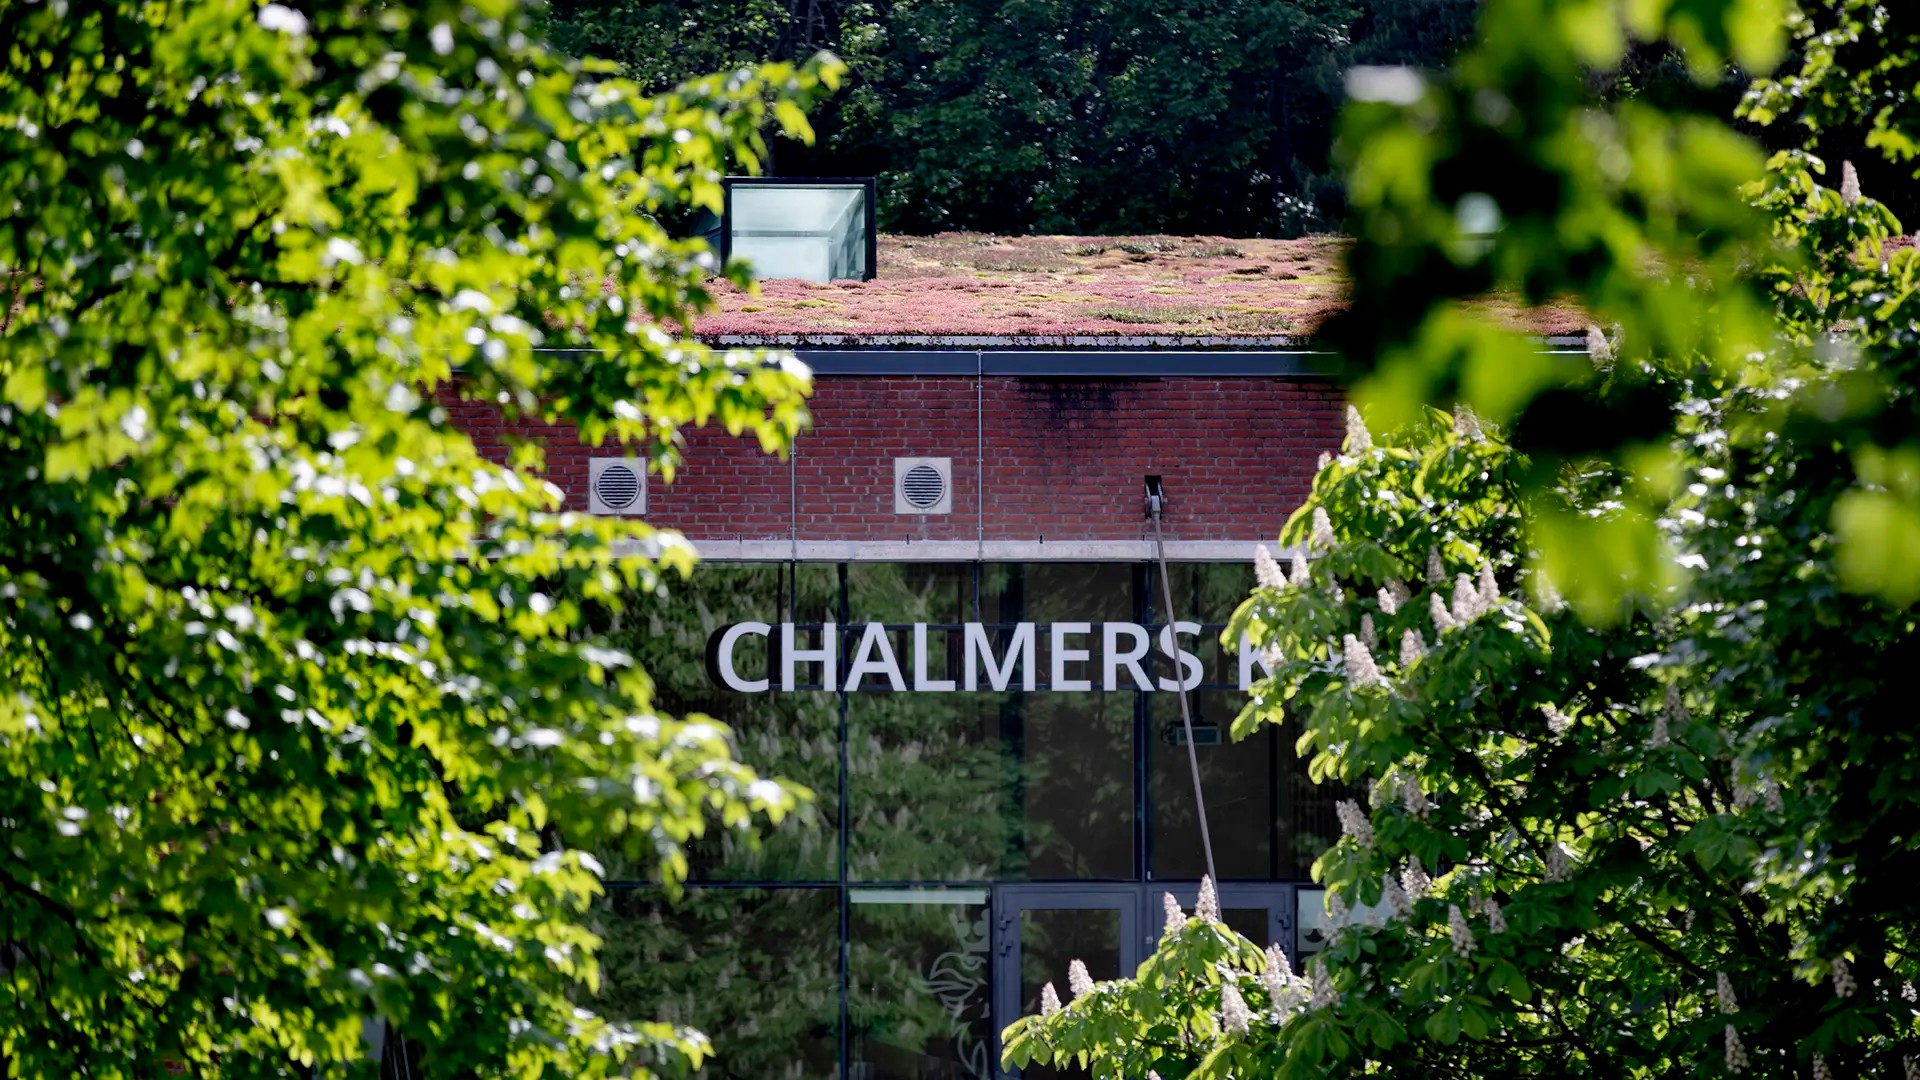 Trees and Chalmers building